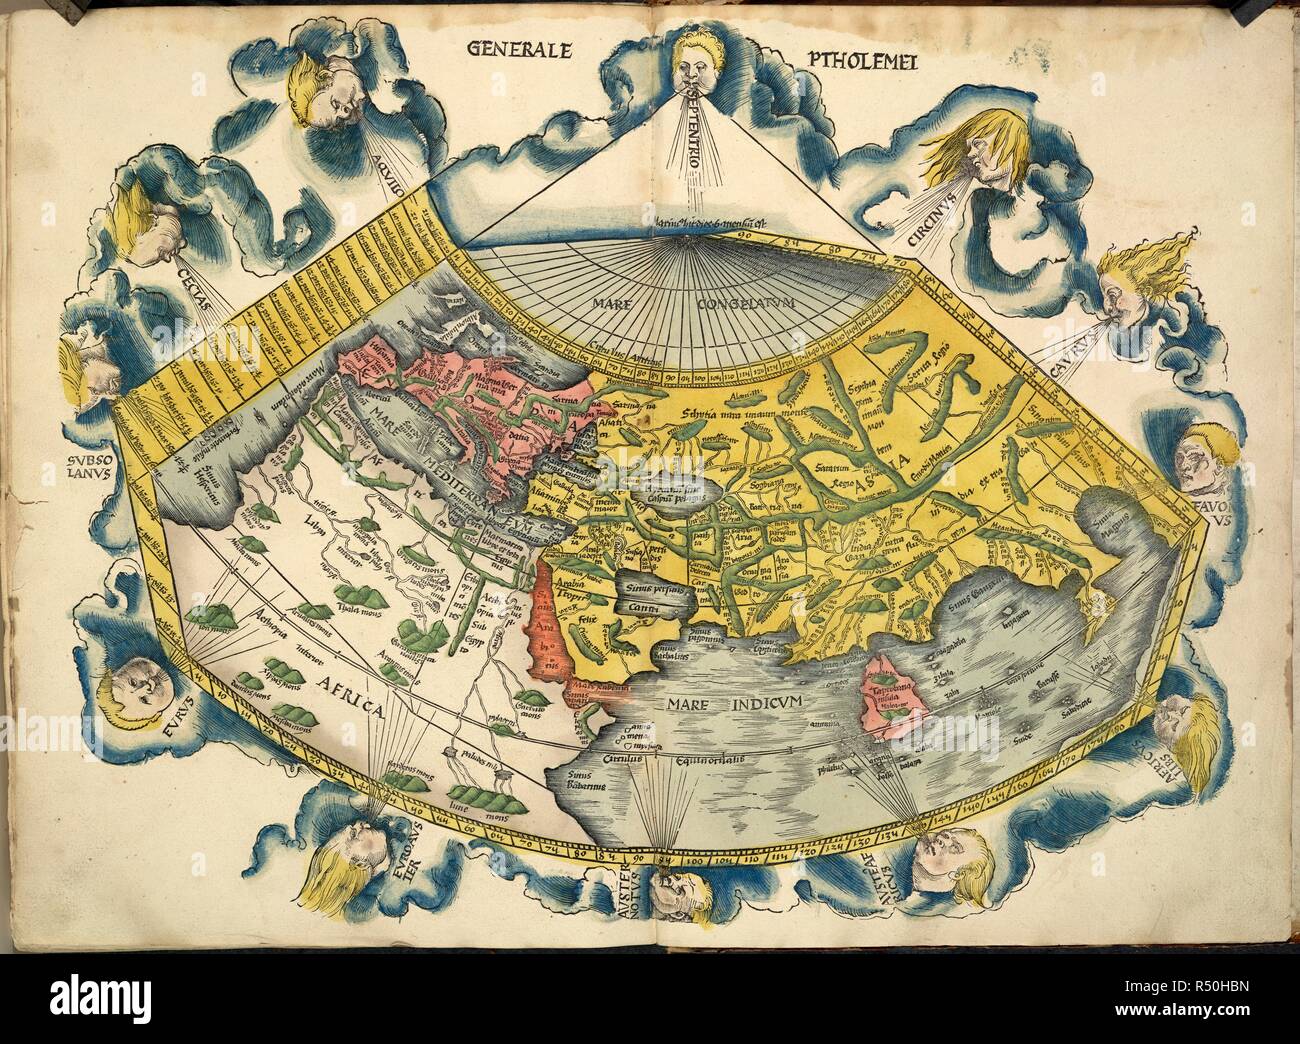 Ptolemic World Map. [Map of the Ancient World.] Lithographed from an a. Strasbourg, 1513. World Map by Ptolemy.  Image taken from [Map of the Ancient World.] Lithographed from an atlas to Ptolemy's Geography.  Originally published/produced in Strasbourg, 1513. . Source: Maps.C.1.d.9,. Stock Photo